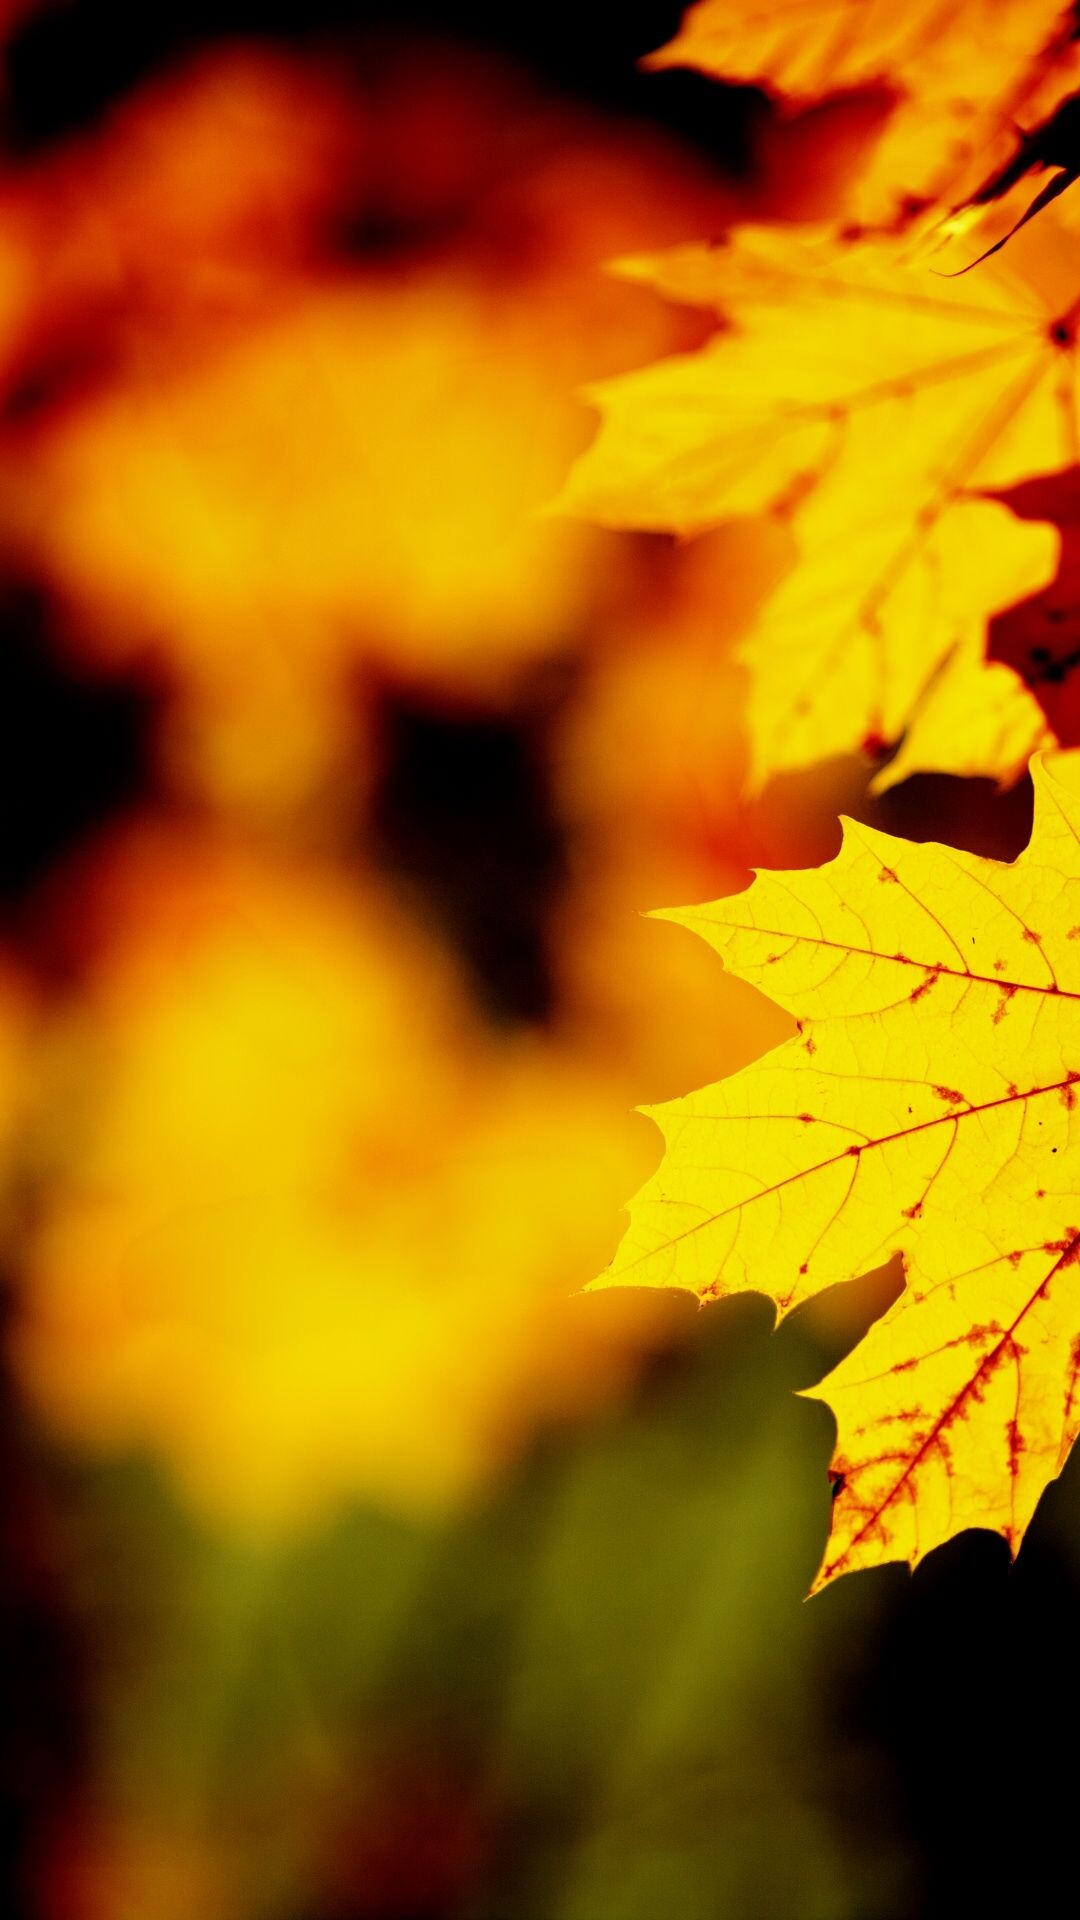 Gold Leaf: Blurred gold light, Yellowish color of autumn maple tree, Chlorophyll breakdown. 1080x1920 Full HD Background.